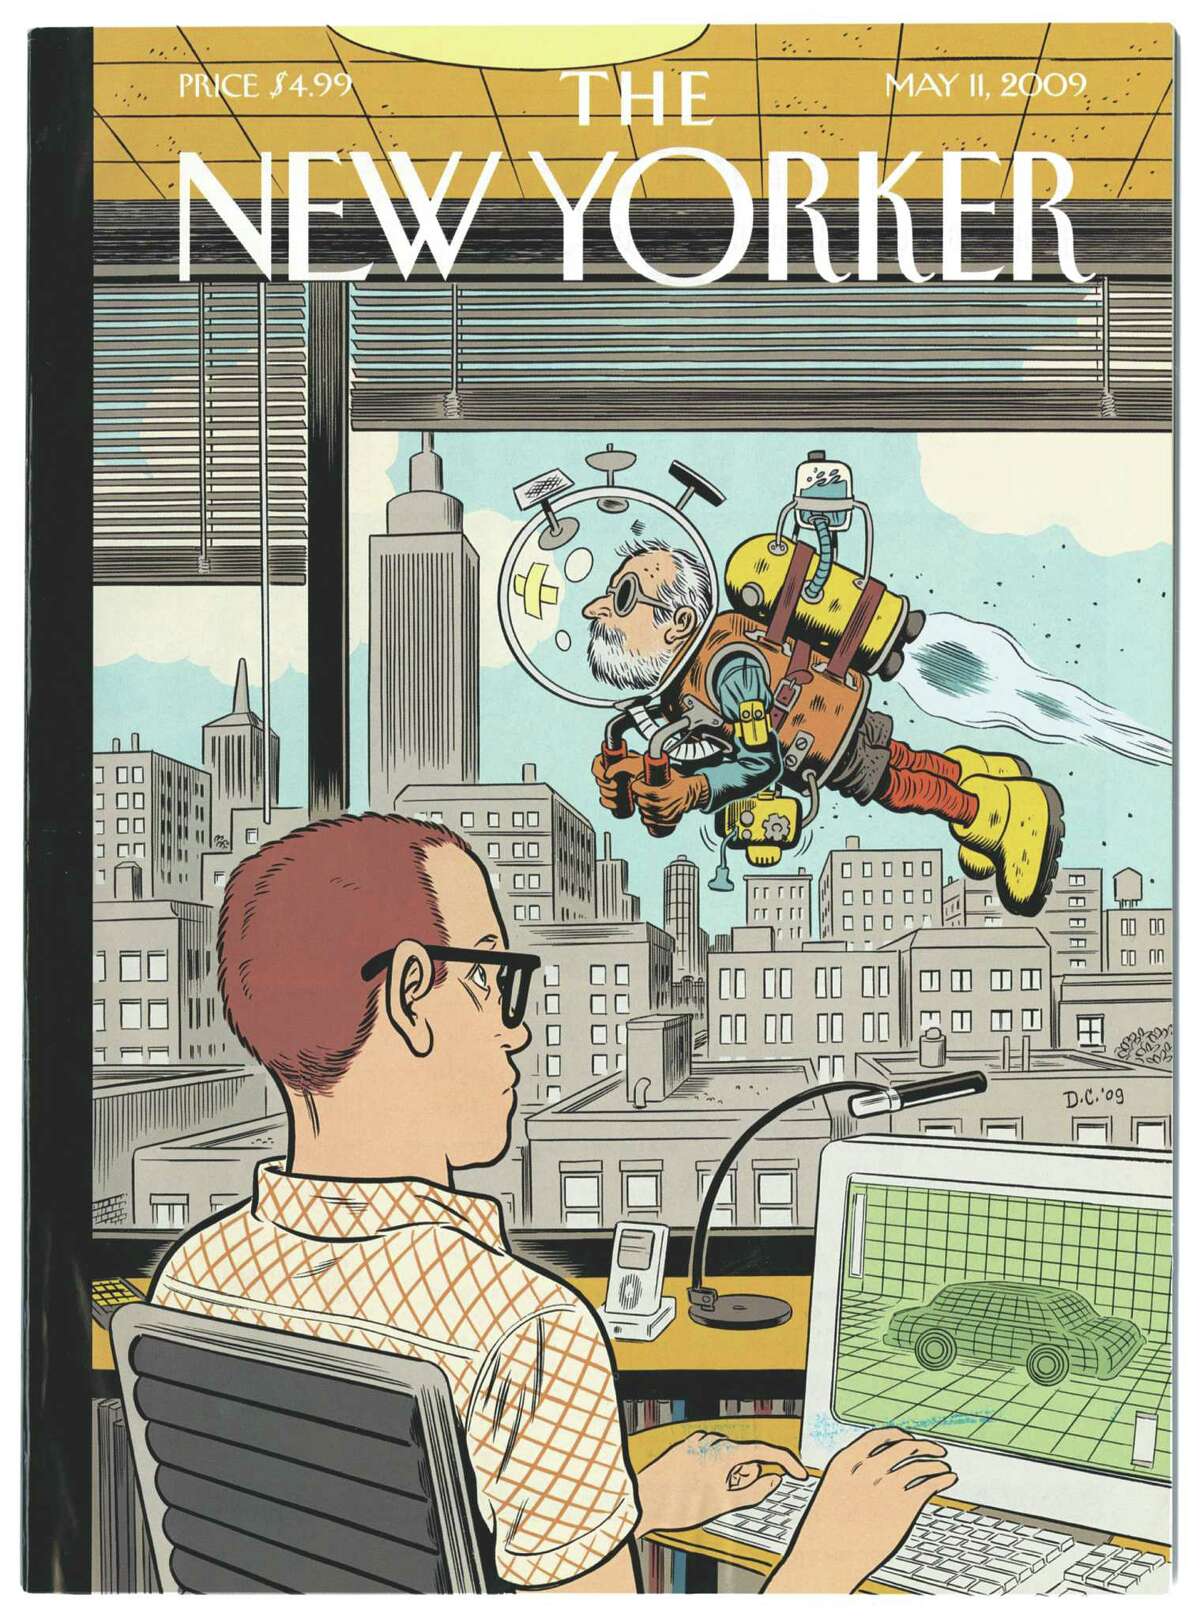 Daniel Clowes created the cover for the May 11, 2009 edition of the New Yorker.